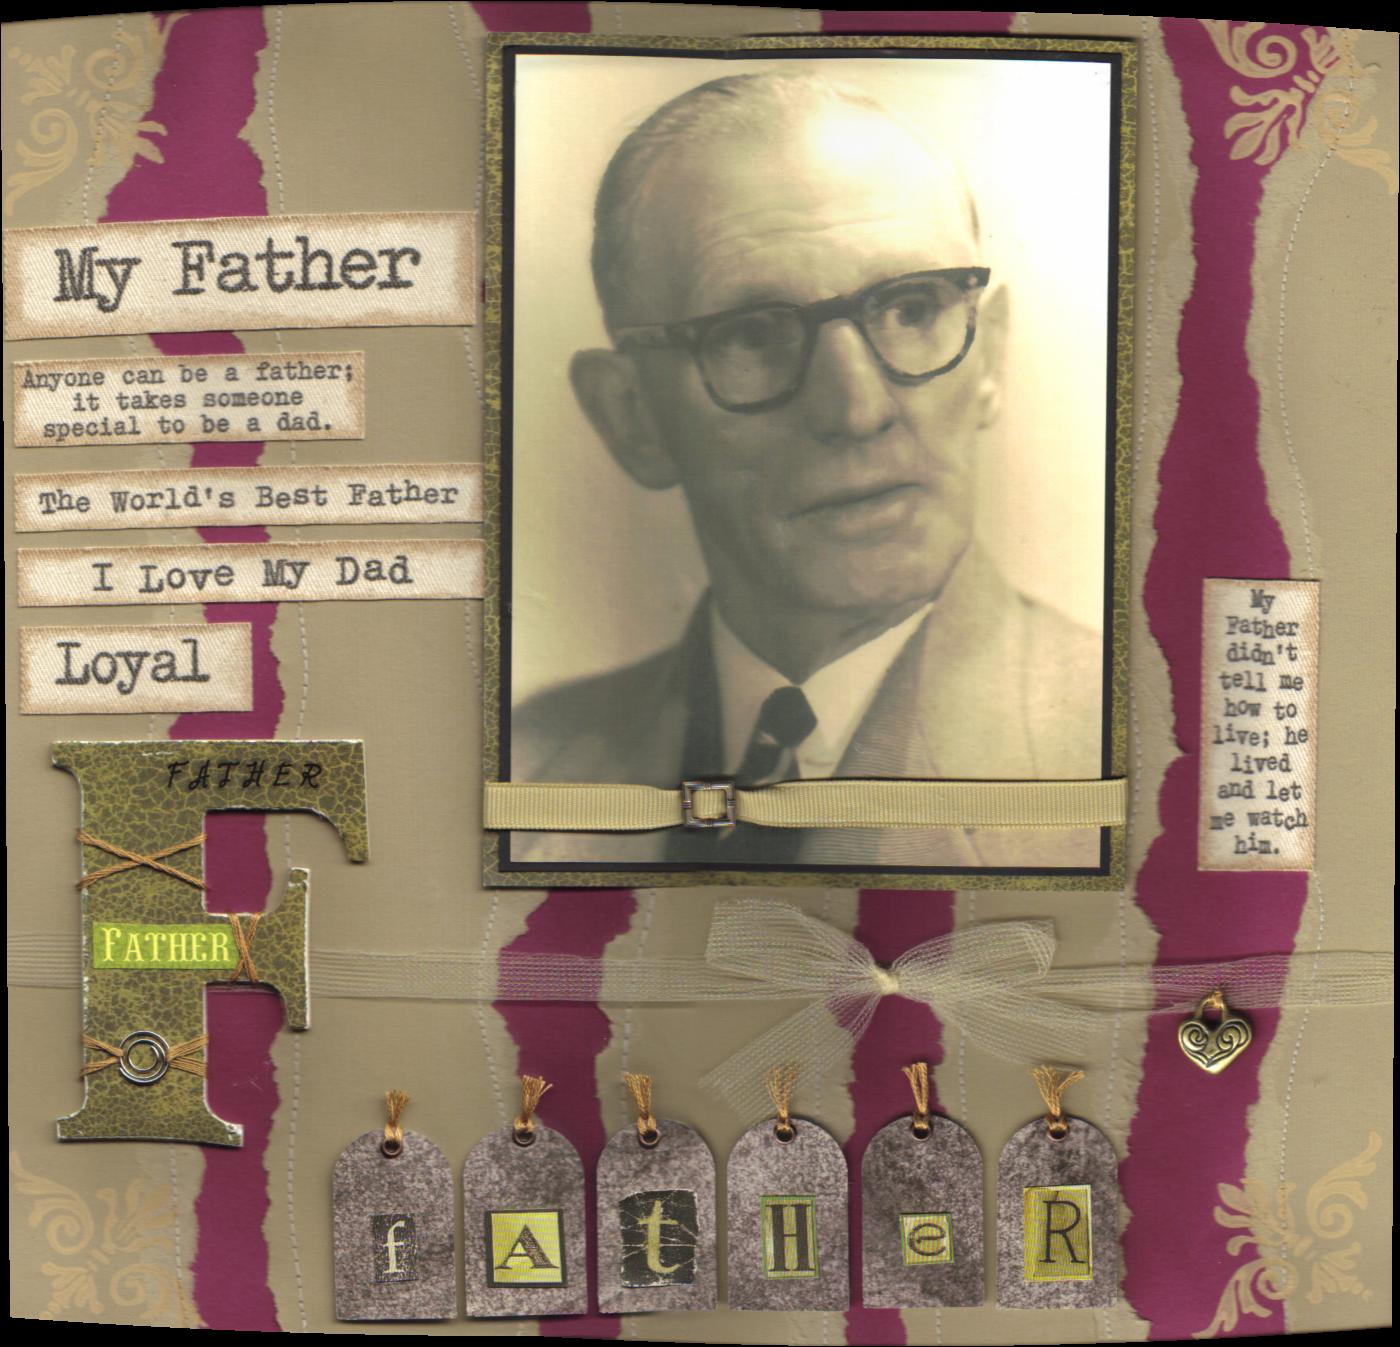 [father+scrapbooking+layout.jpg]